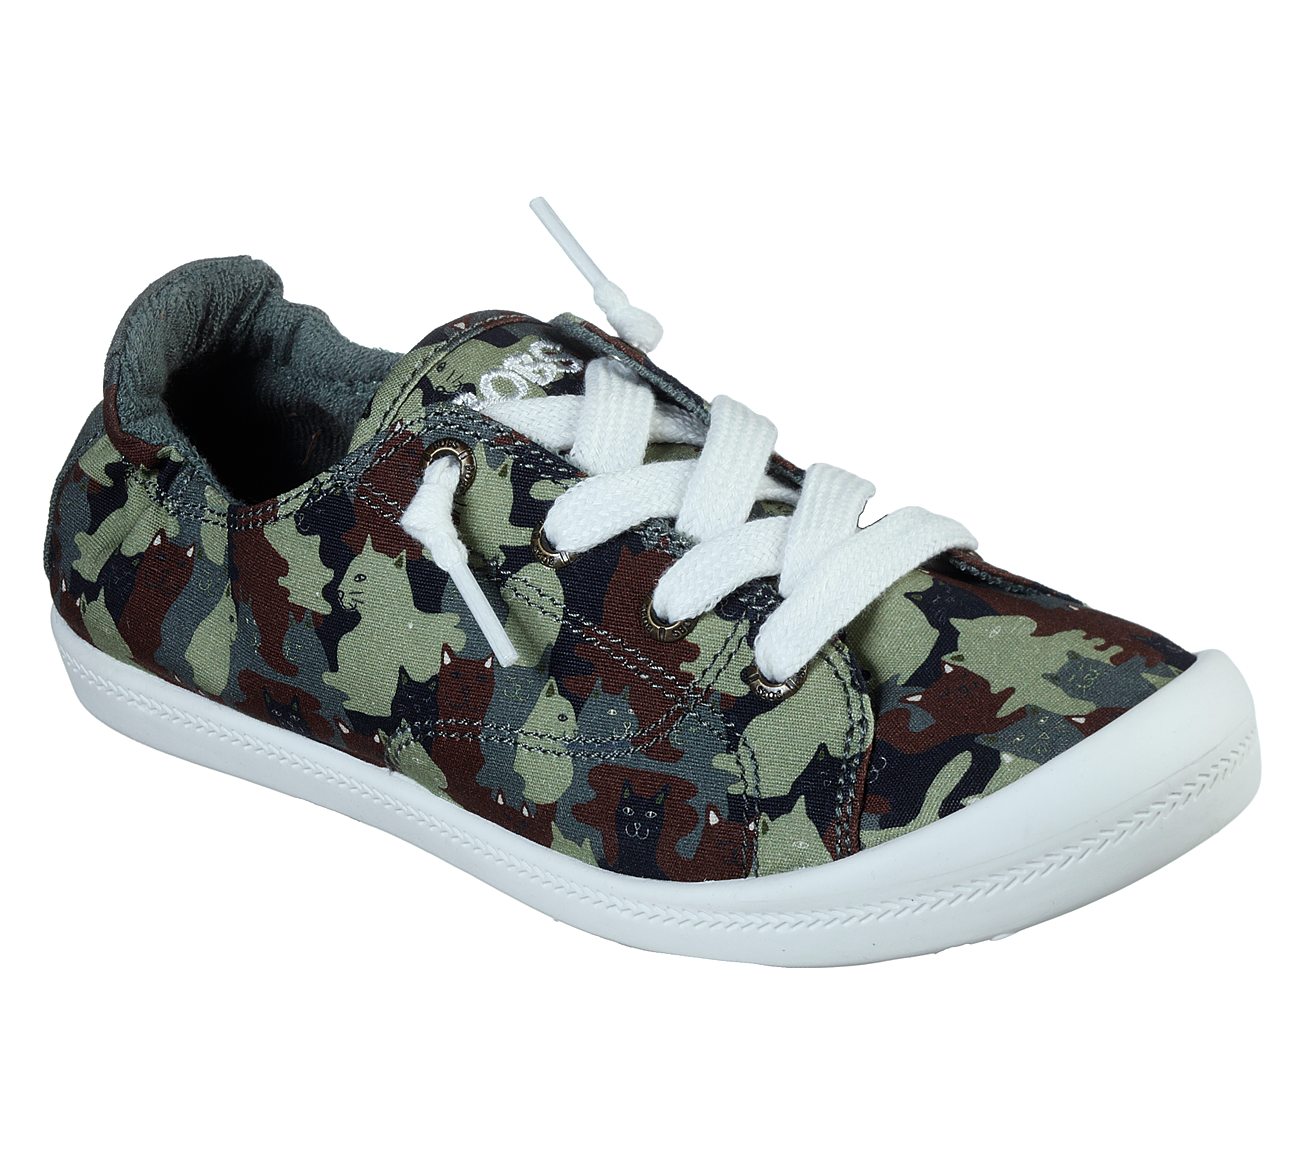 bobs camouflage shoes